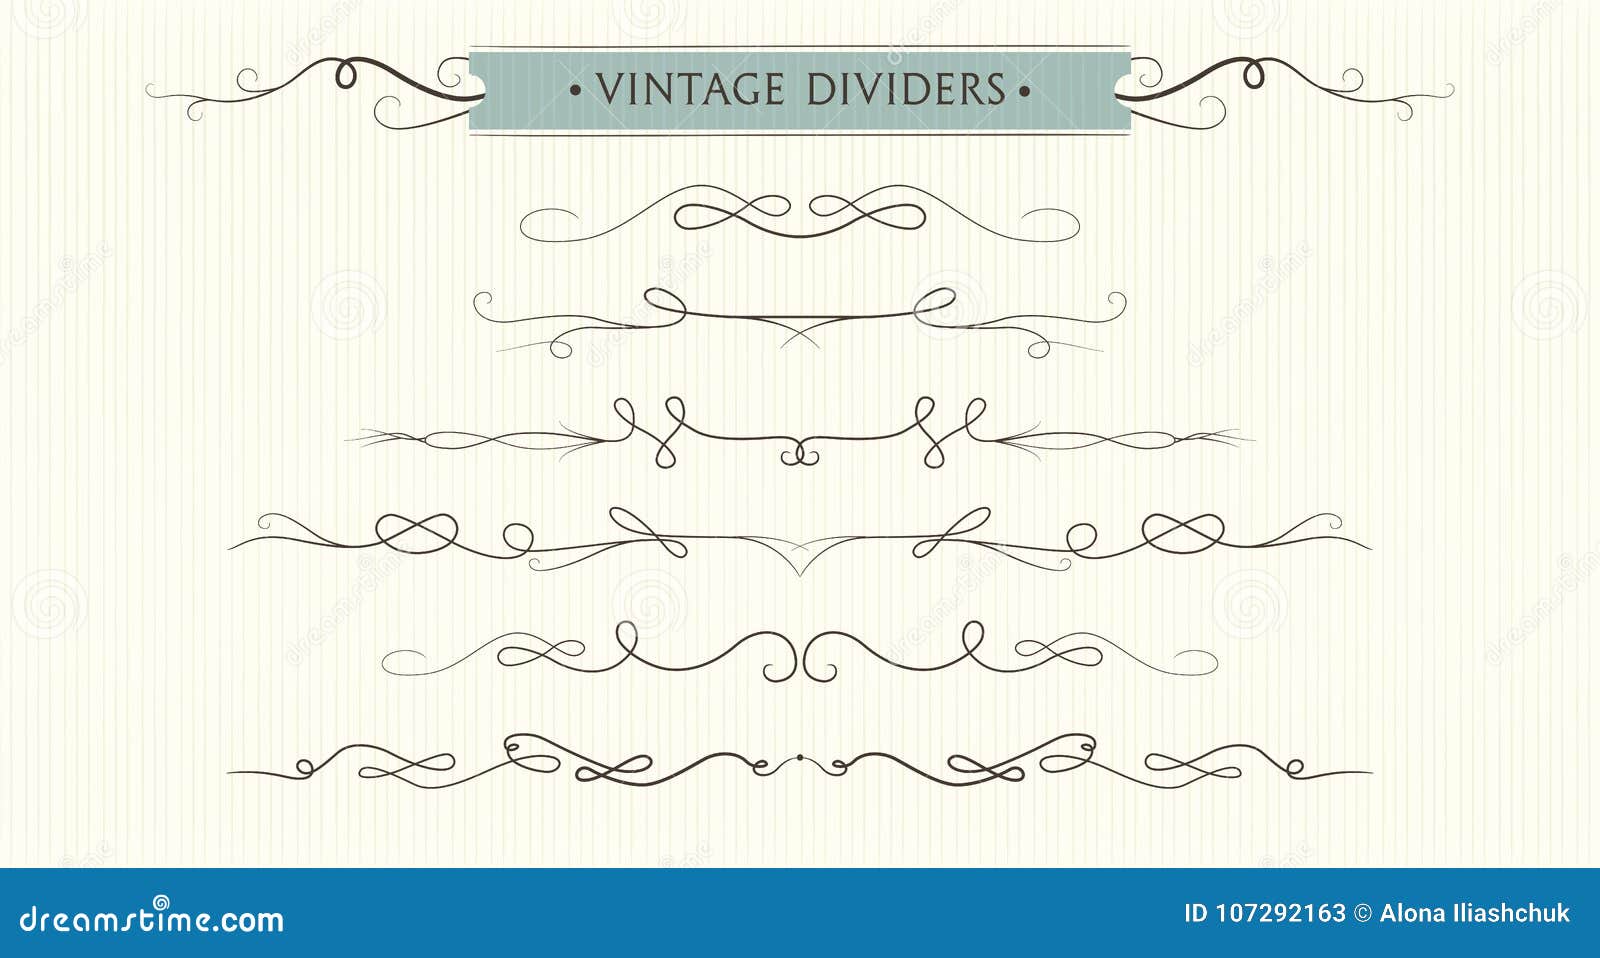  hand drawn flourishes, dividers, graphic lovely   set. cute vintage borders. wedding invitation cards, page d